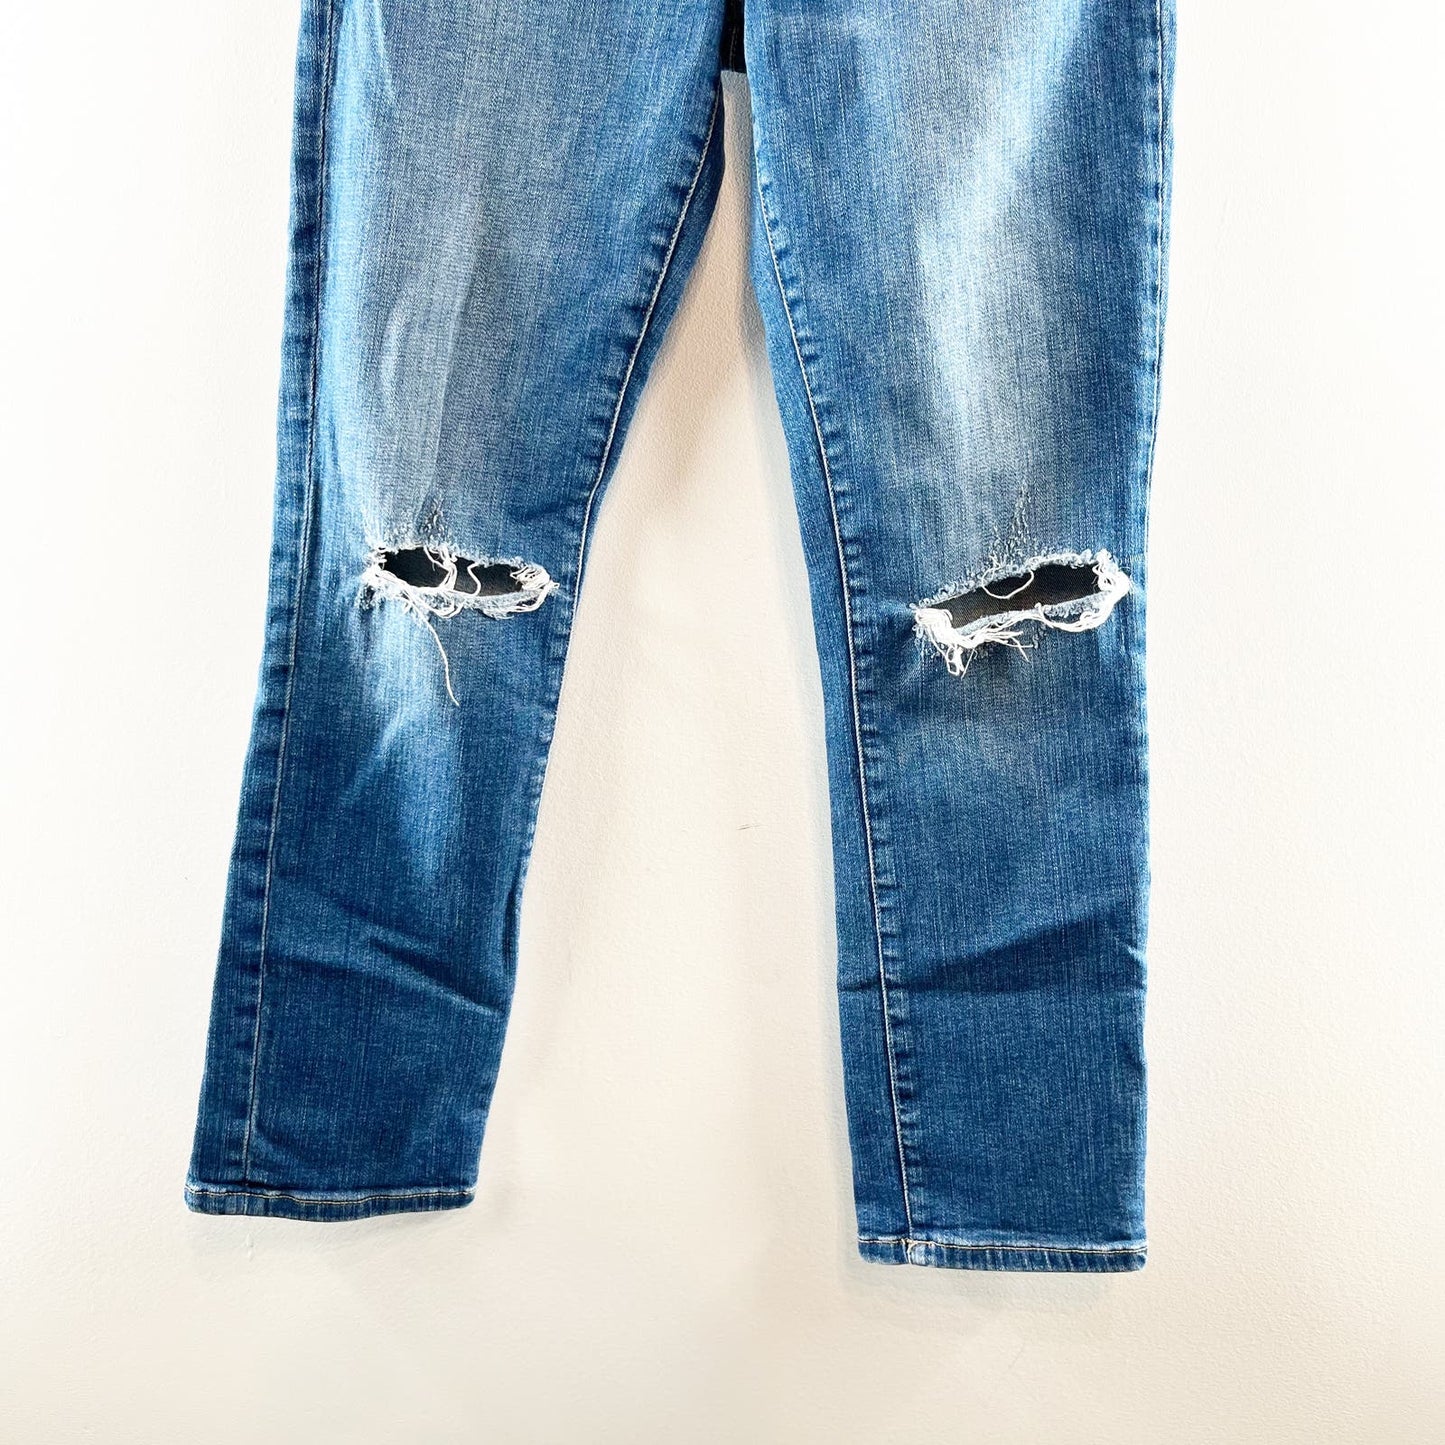 Current / Elliot High Rise Busted Knees Distressed Skinny Jeans Blue 2